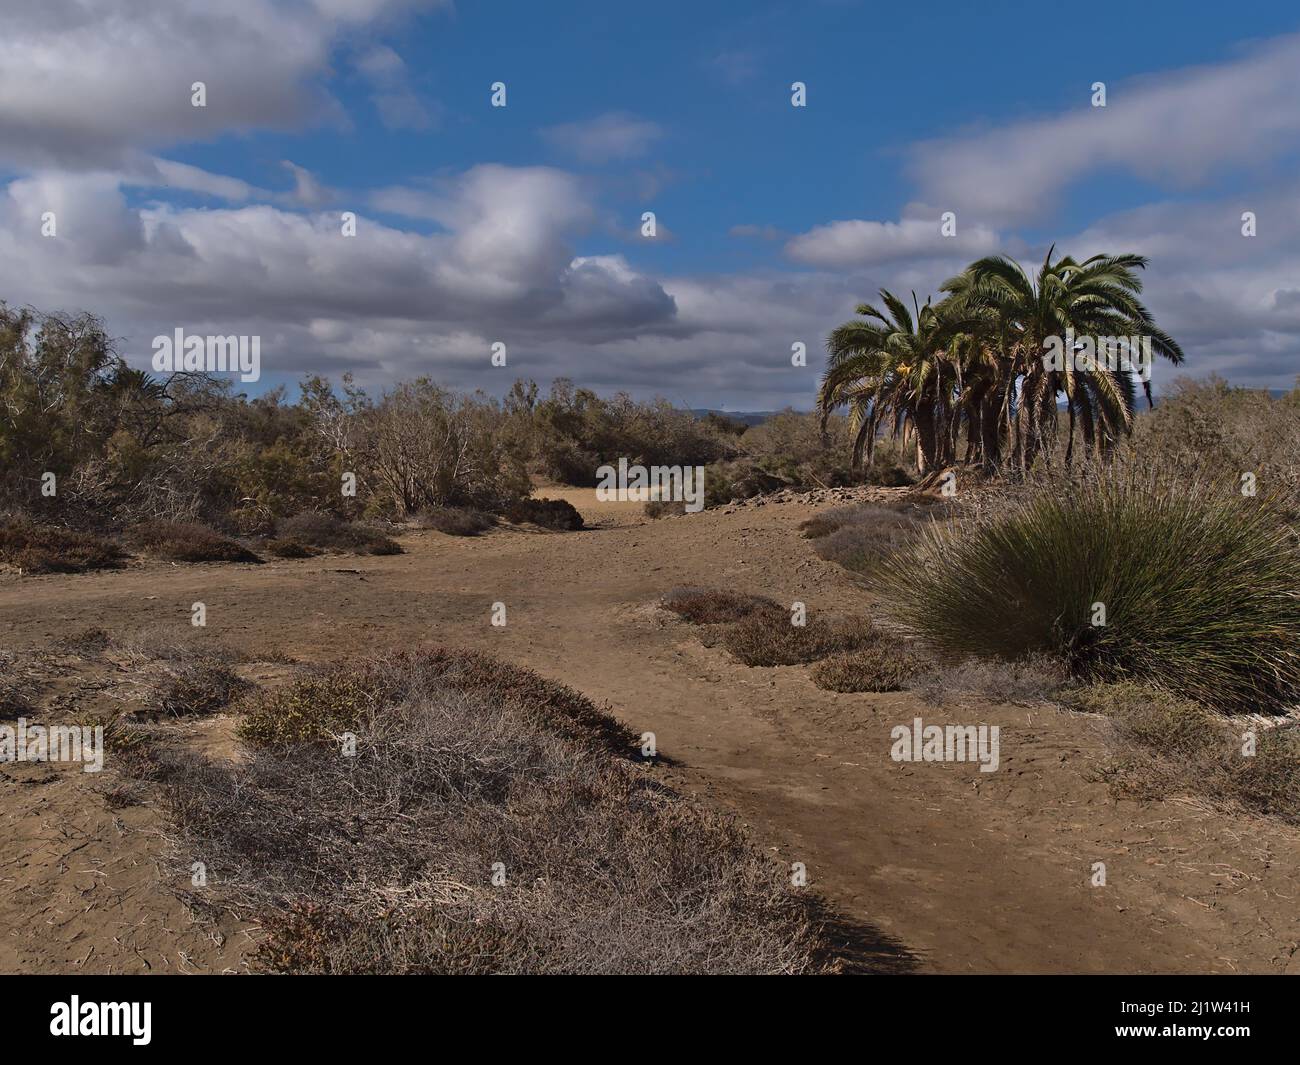 View of protected vegetation in nature reserve Dunas de Maspalomas in the south of Gran Canaria, Canary Islands, Spain with palm trees and clouds. Stock Photo